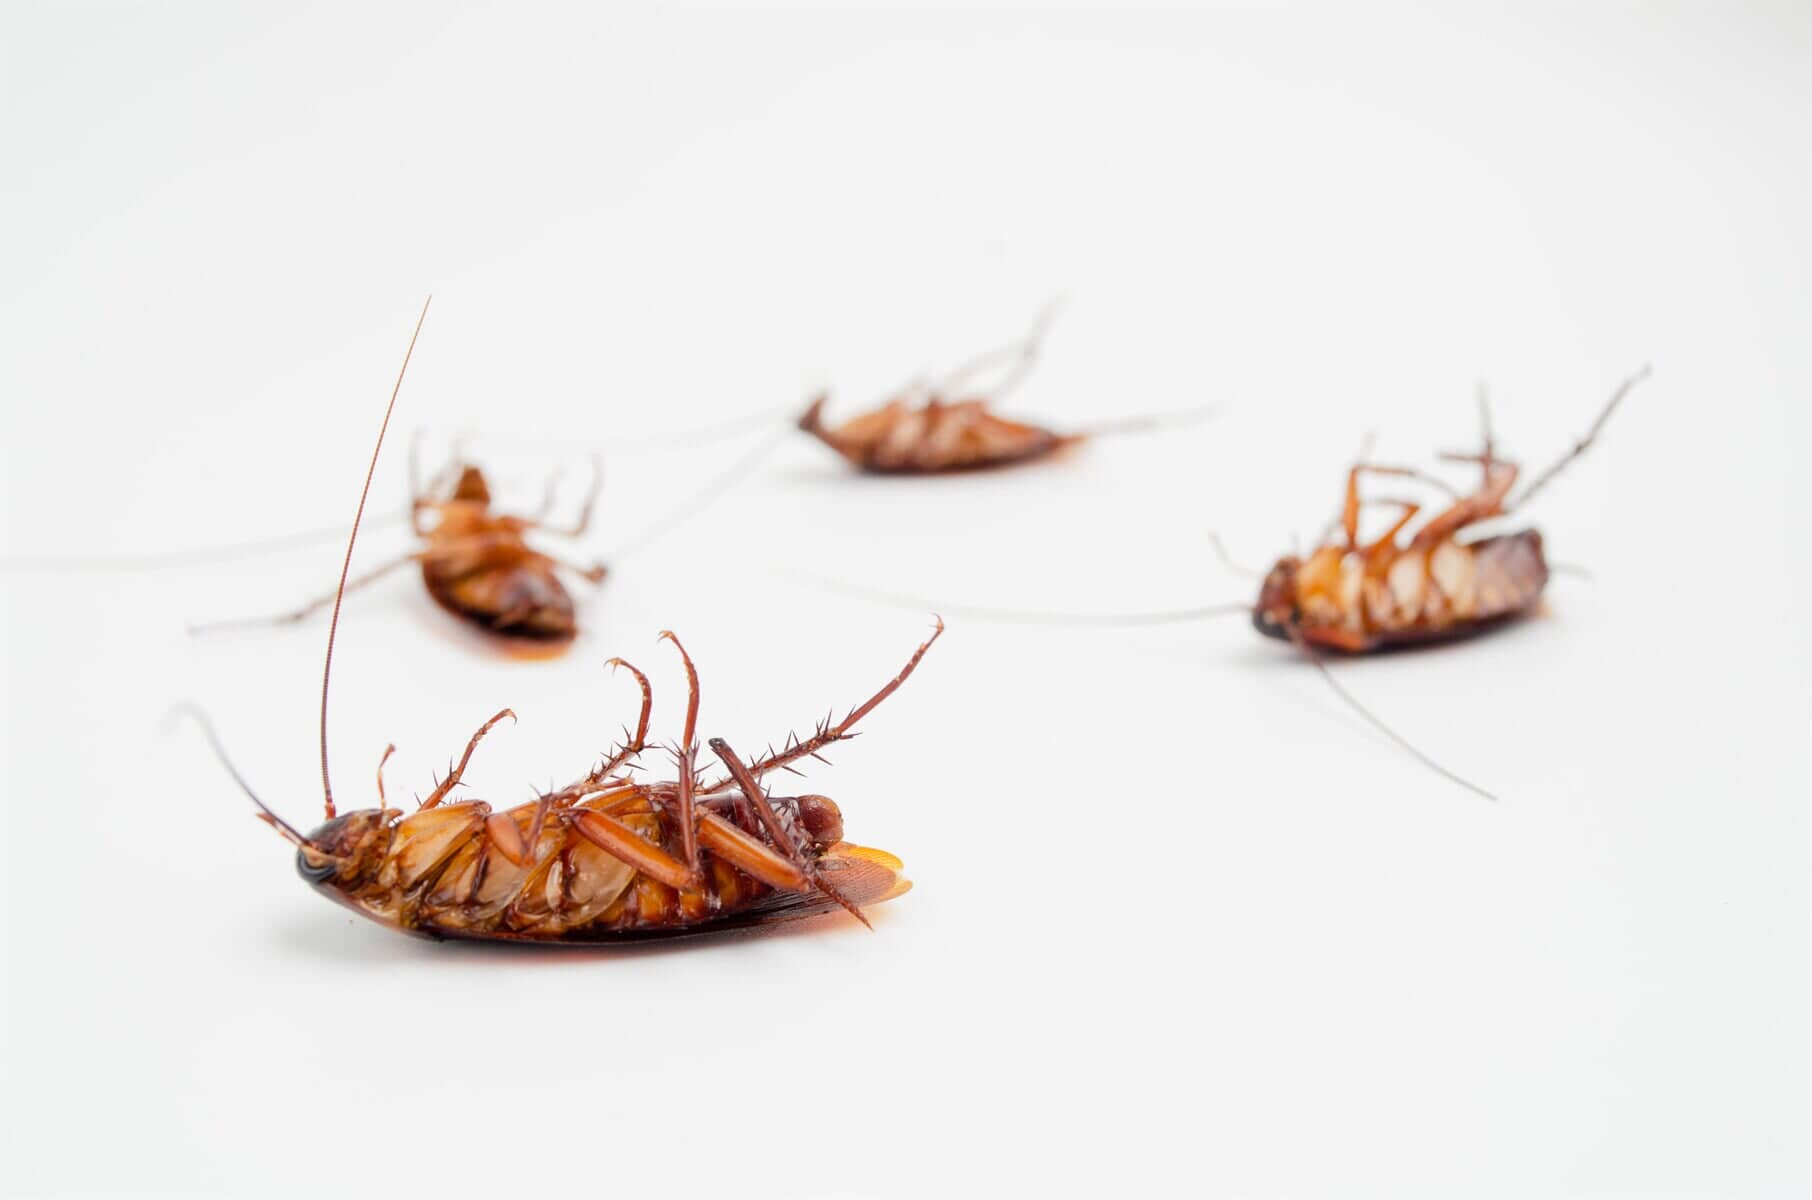 Dead Cockroaches— Pest Control in Anna Bay, NSW